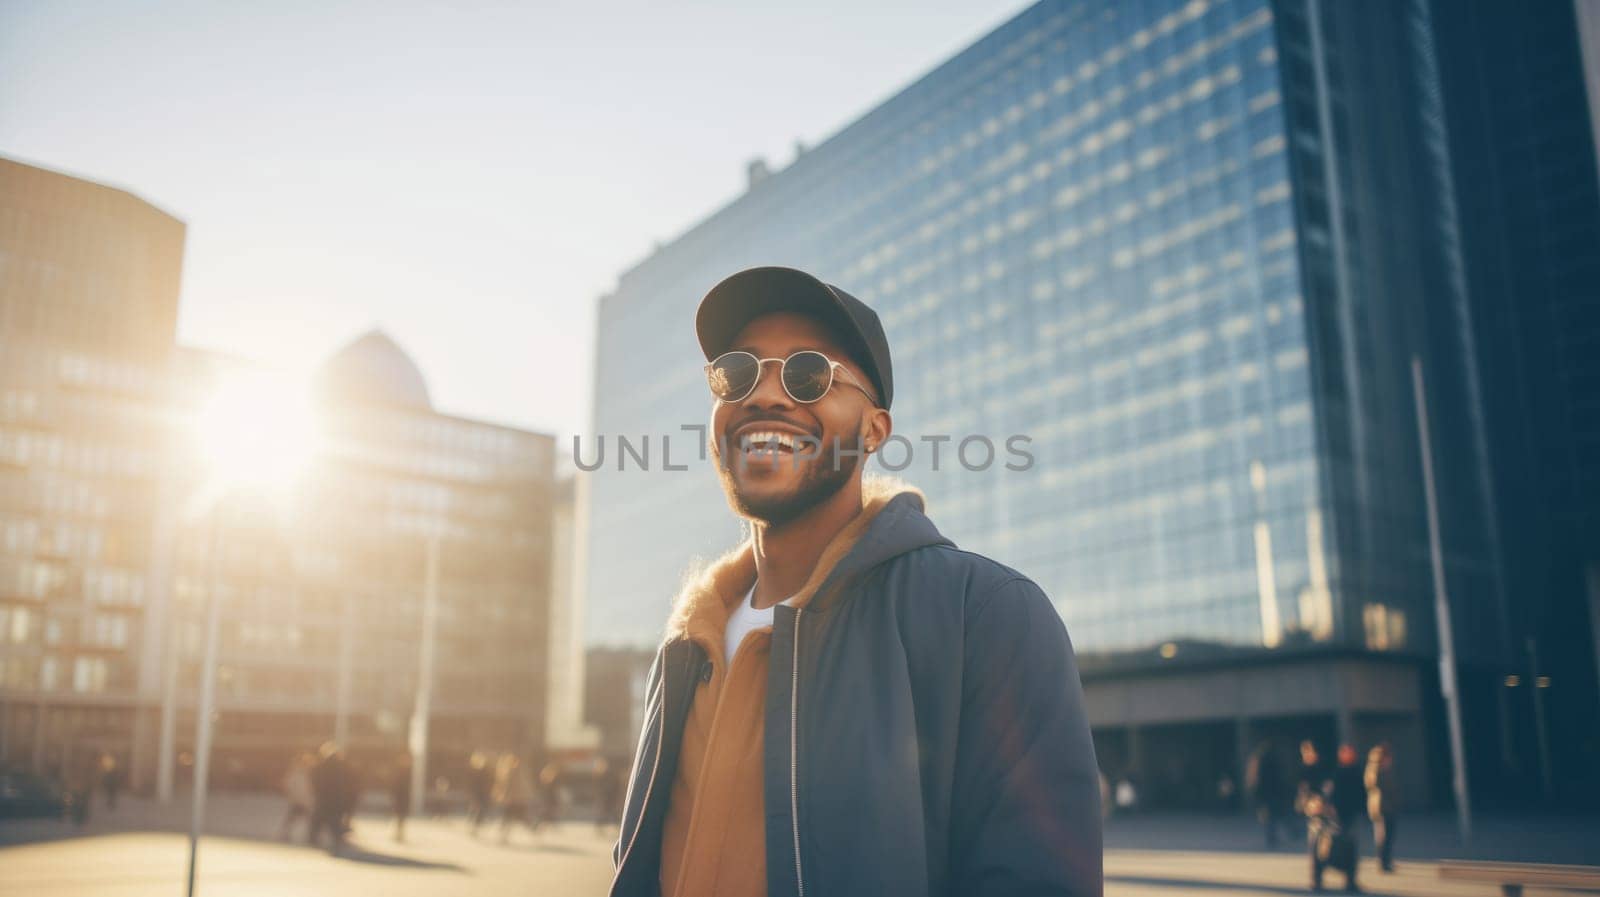 Fashionable portrait of inspired stylish happy laughing black American young man in summer sunny city